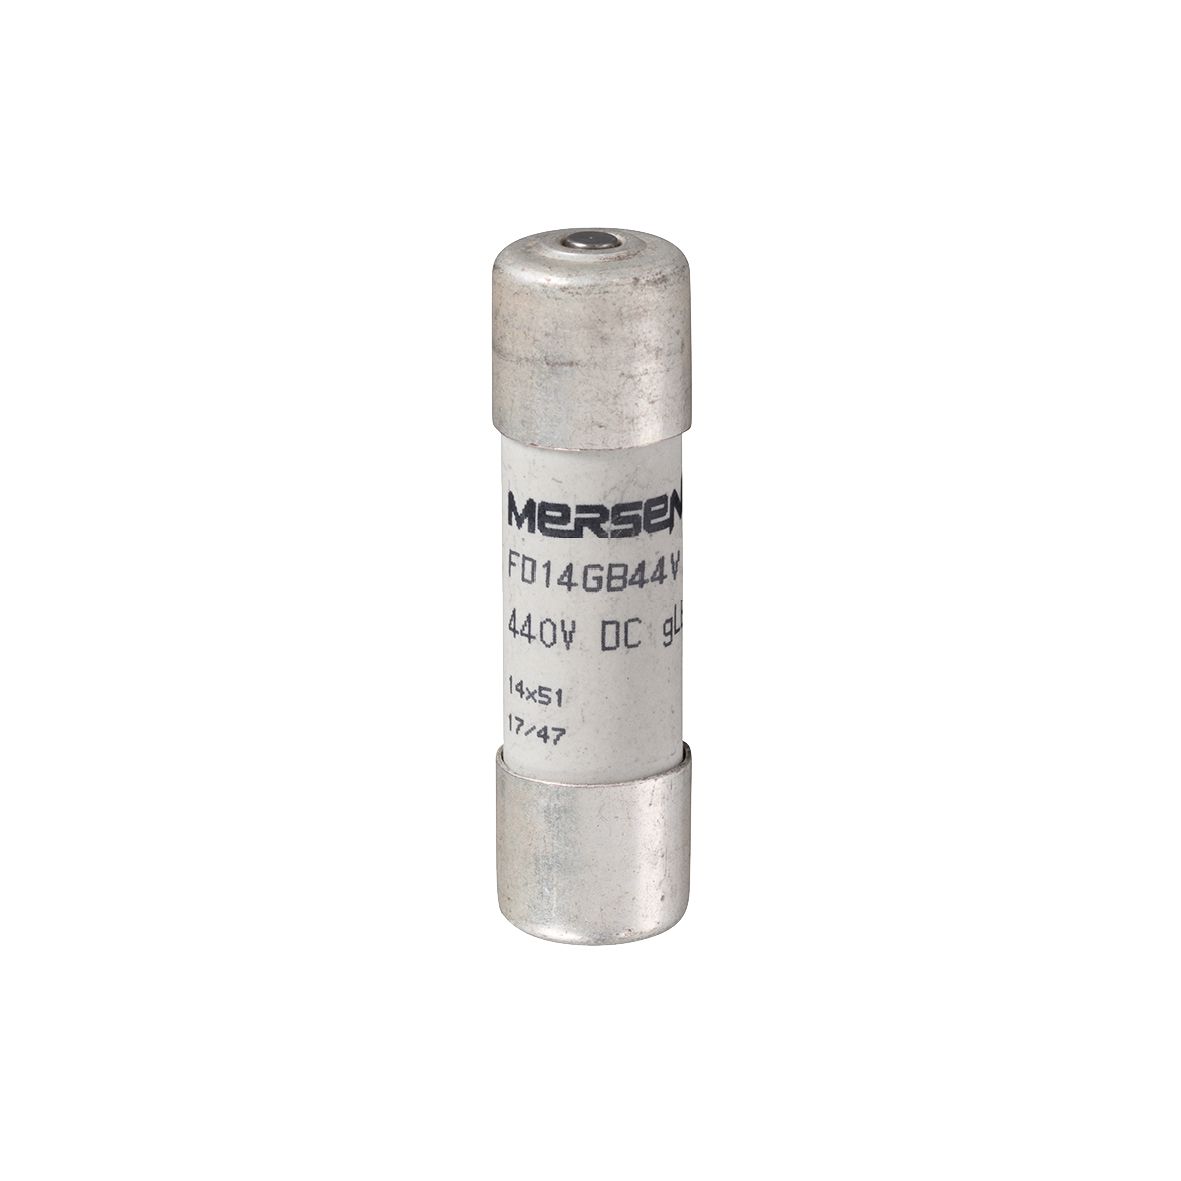 G075722 - Cylindrical fuse-link GRB 440VDC 14x51, 10A with striker